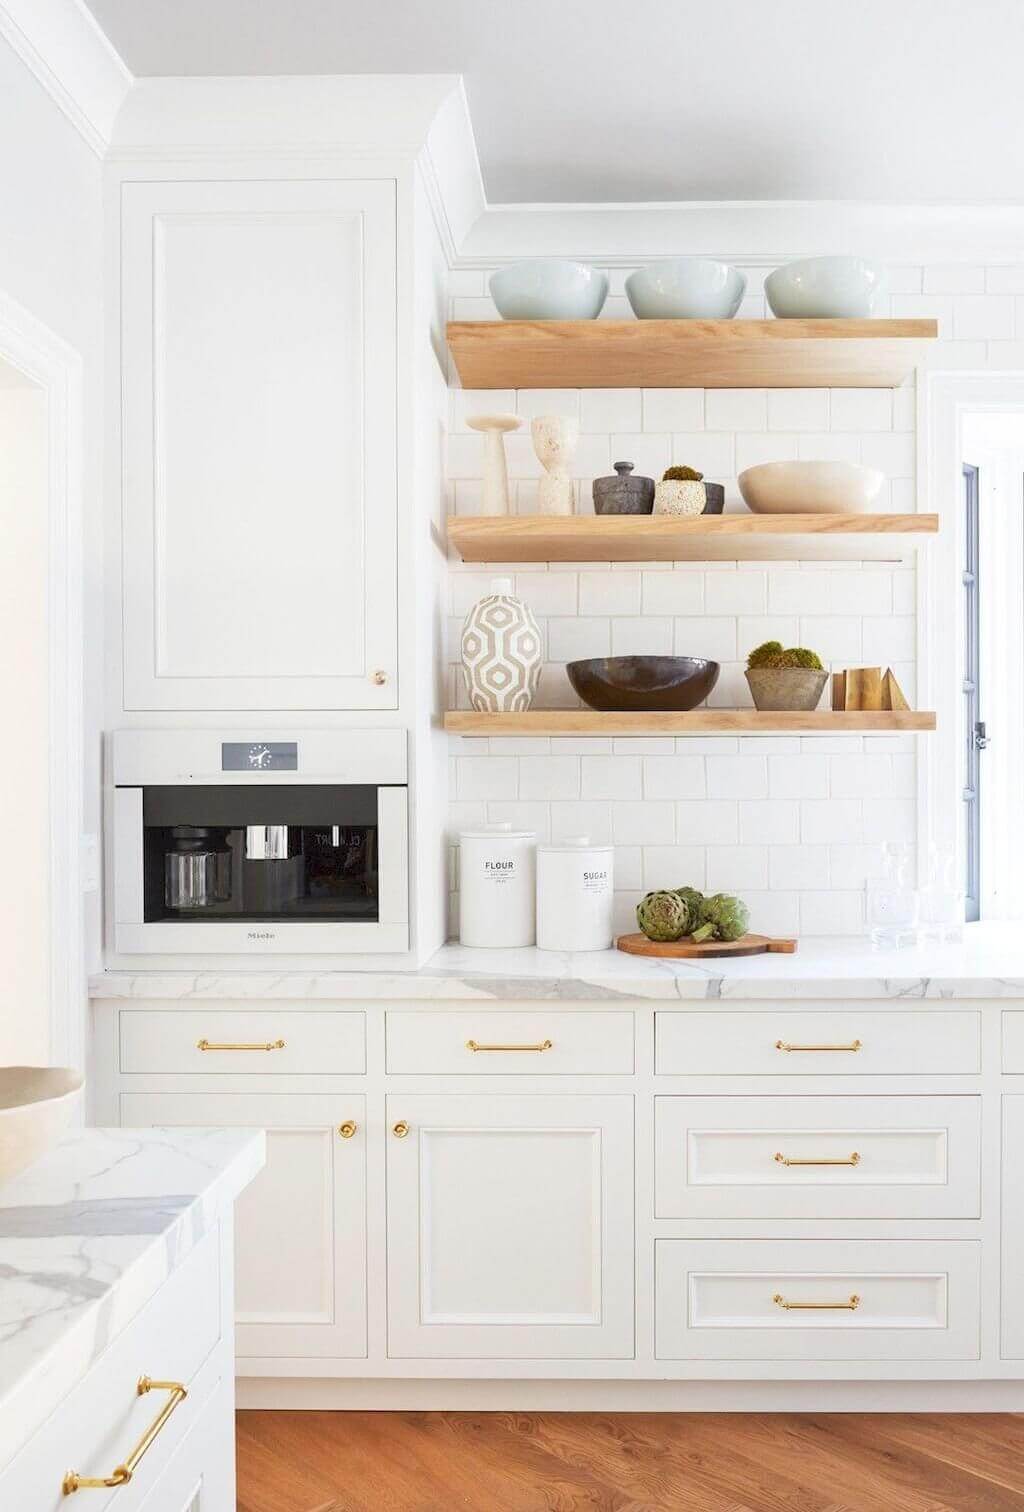 These DIY kitchen design online concepts will wake up the planner in you and have you designing the kitchen you have been dreaming of.